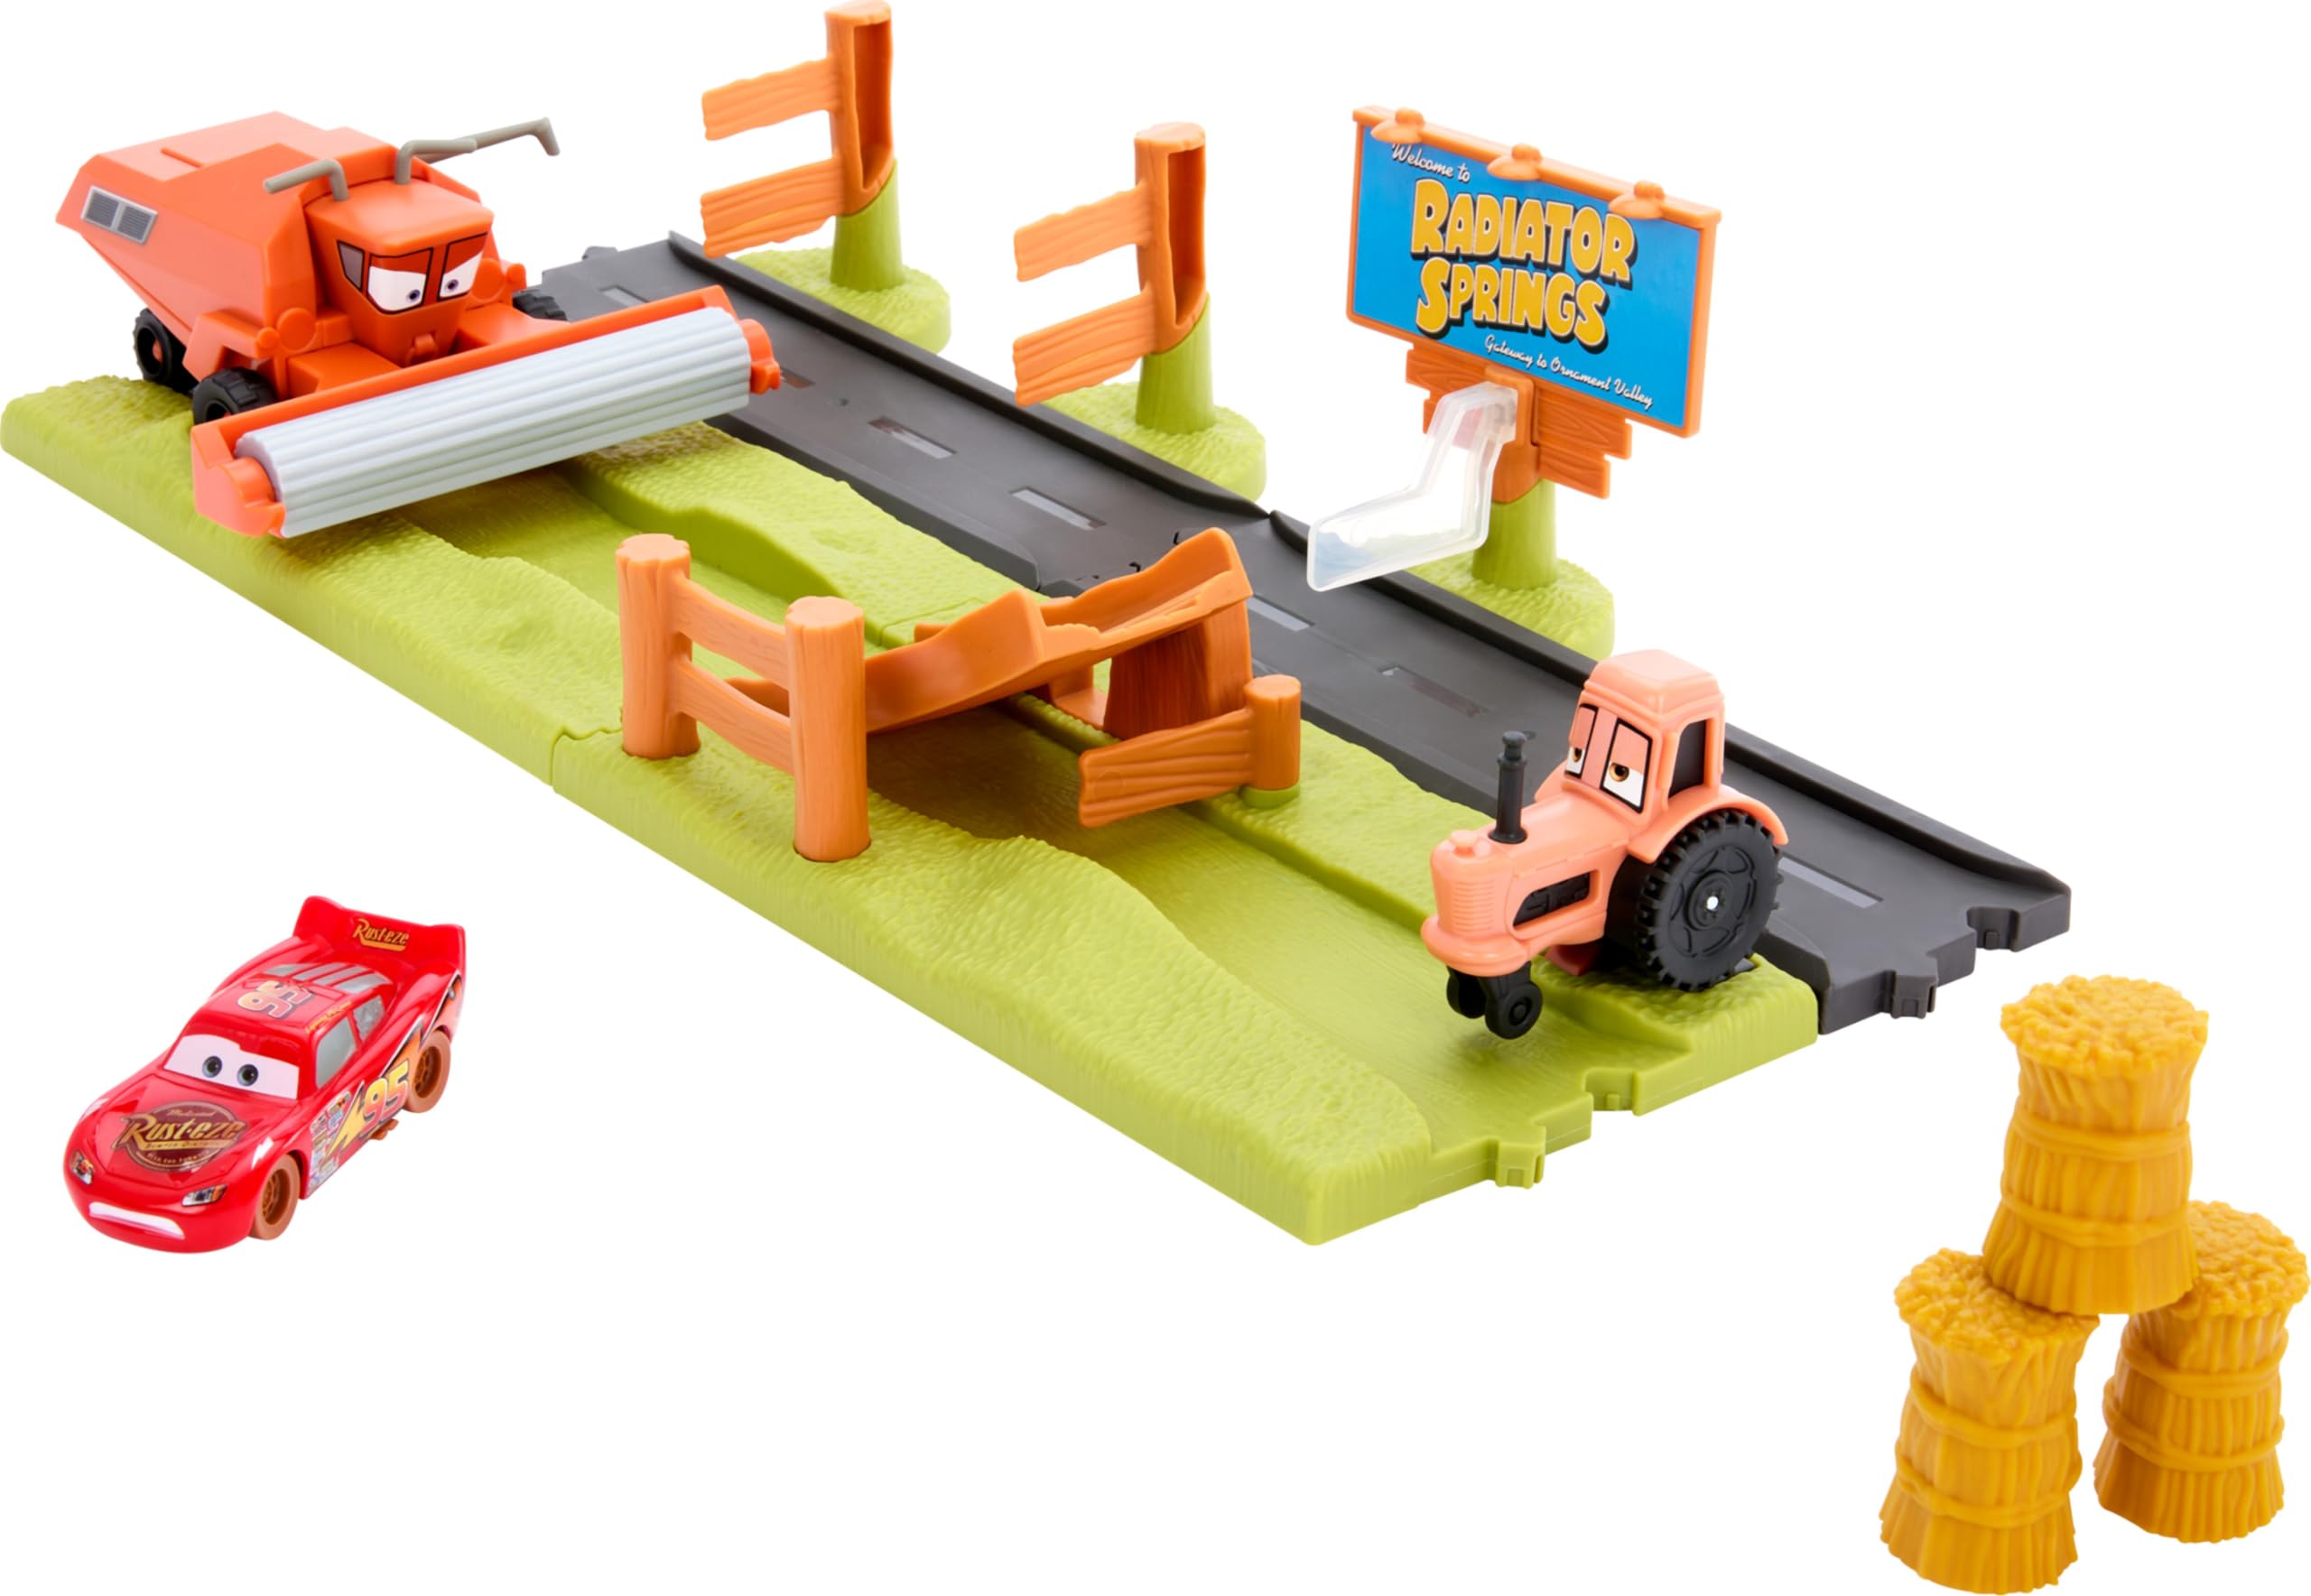 Mattel Disney and Pixar Cars Playset with 3 Toy Vehicles & 2 Ways to Play, Frank Escape & Stunt Race Playset Includes Lightning McQueen